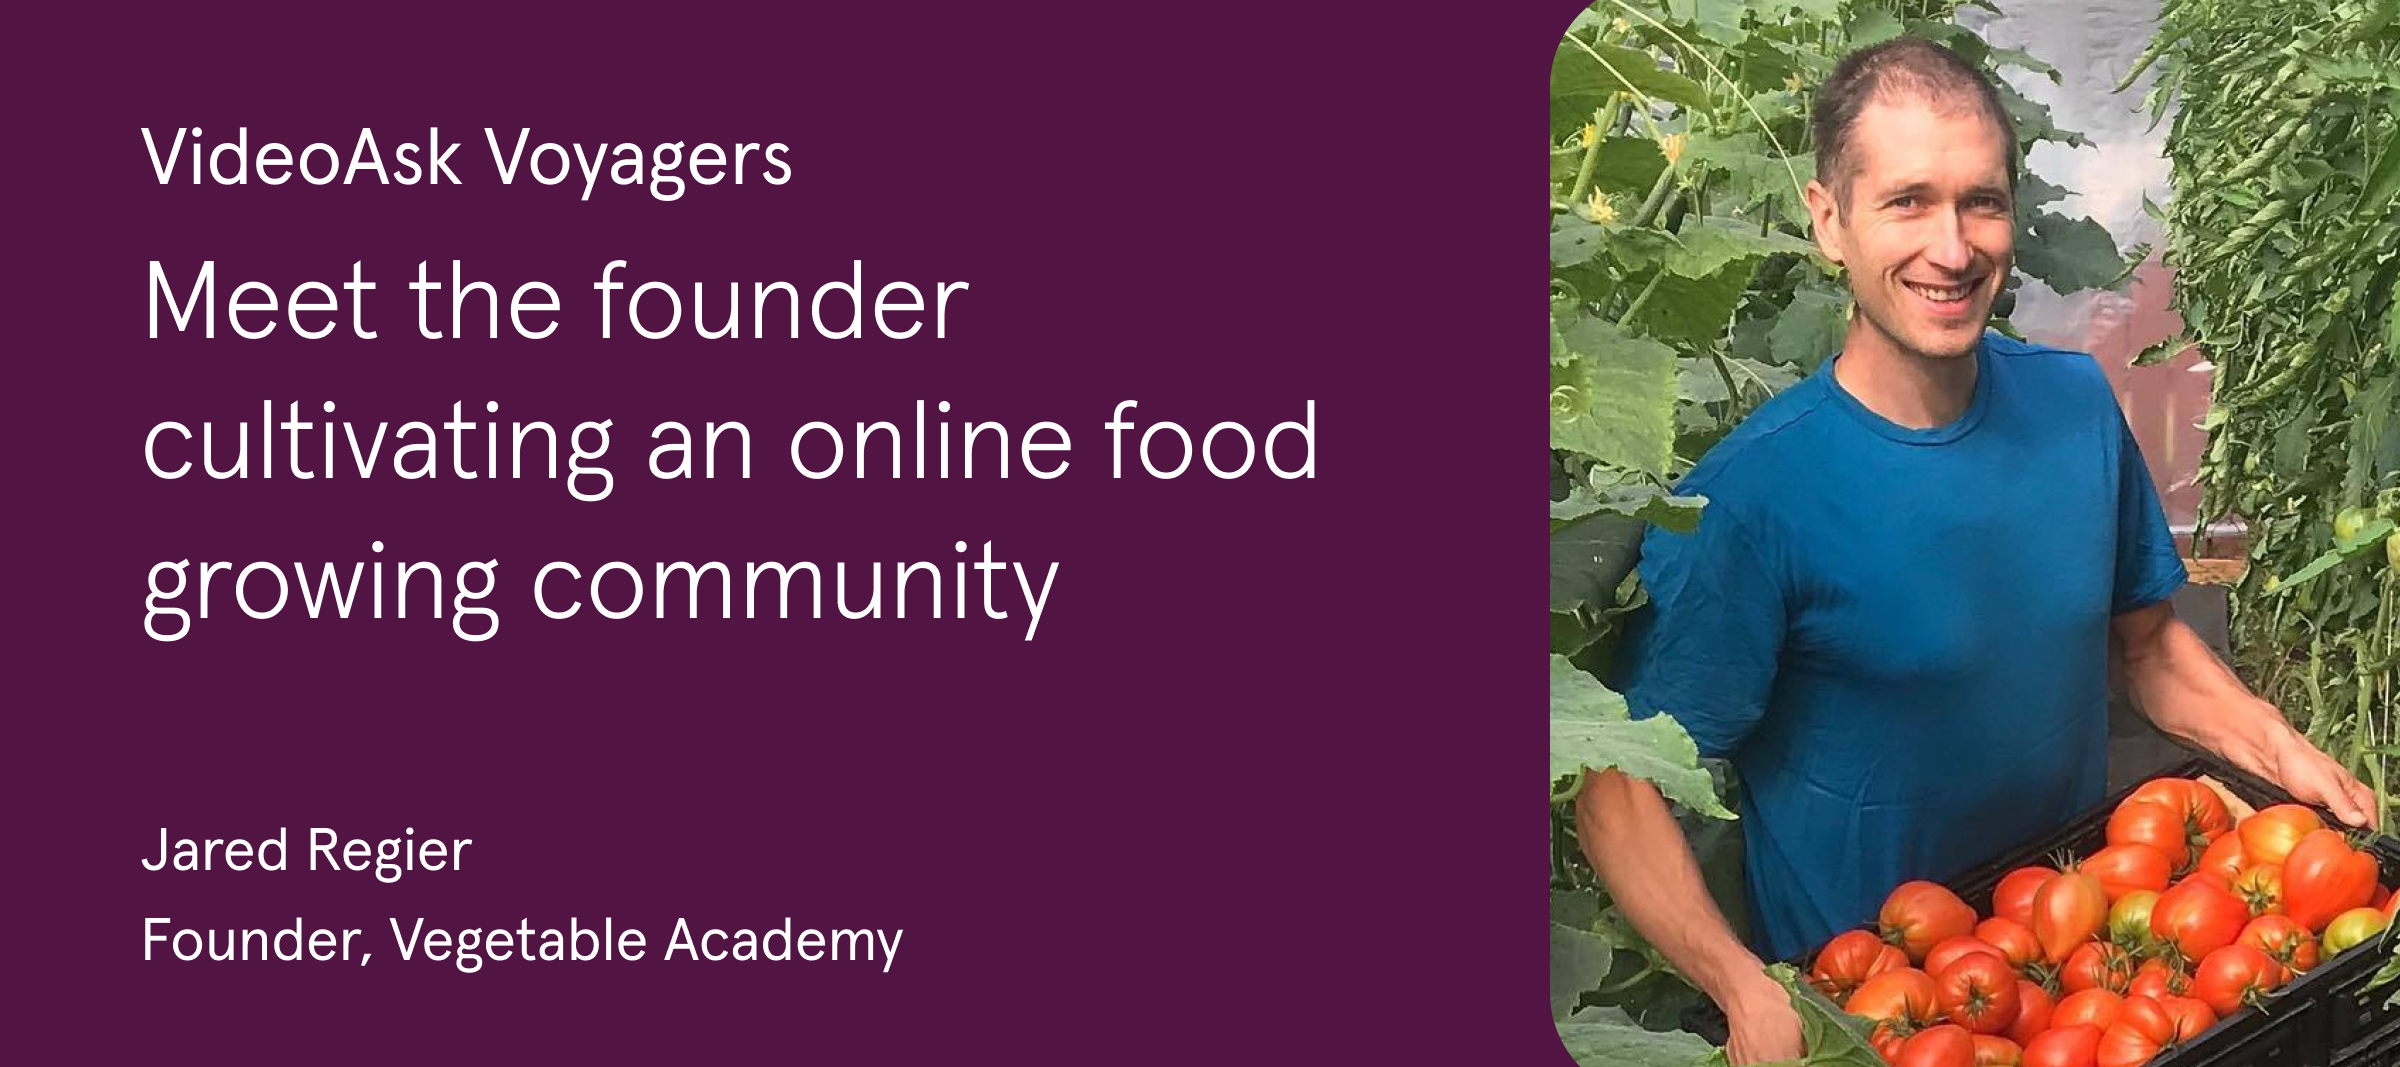 [VideoAsk Voyagers] Meet the founder cultivating an online food growing community 🌱